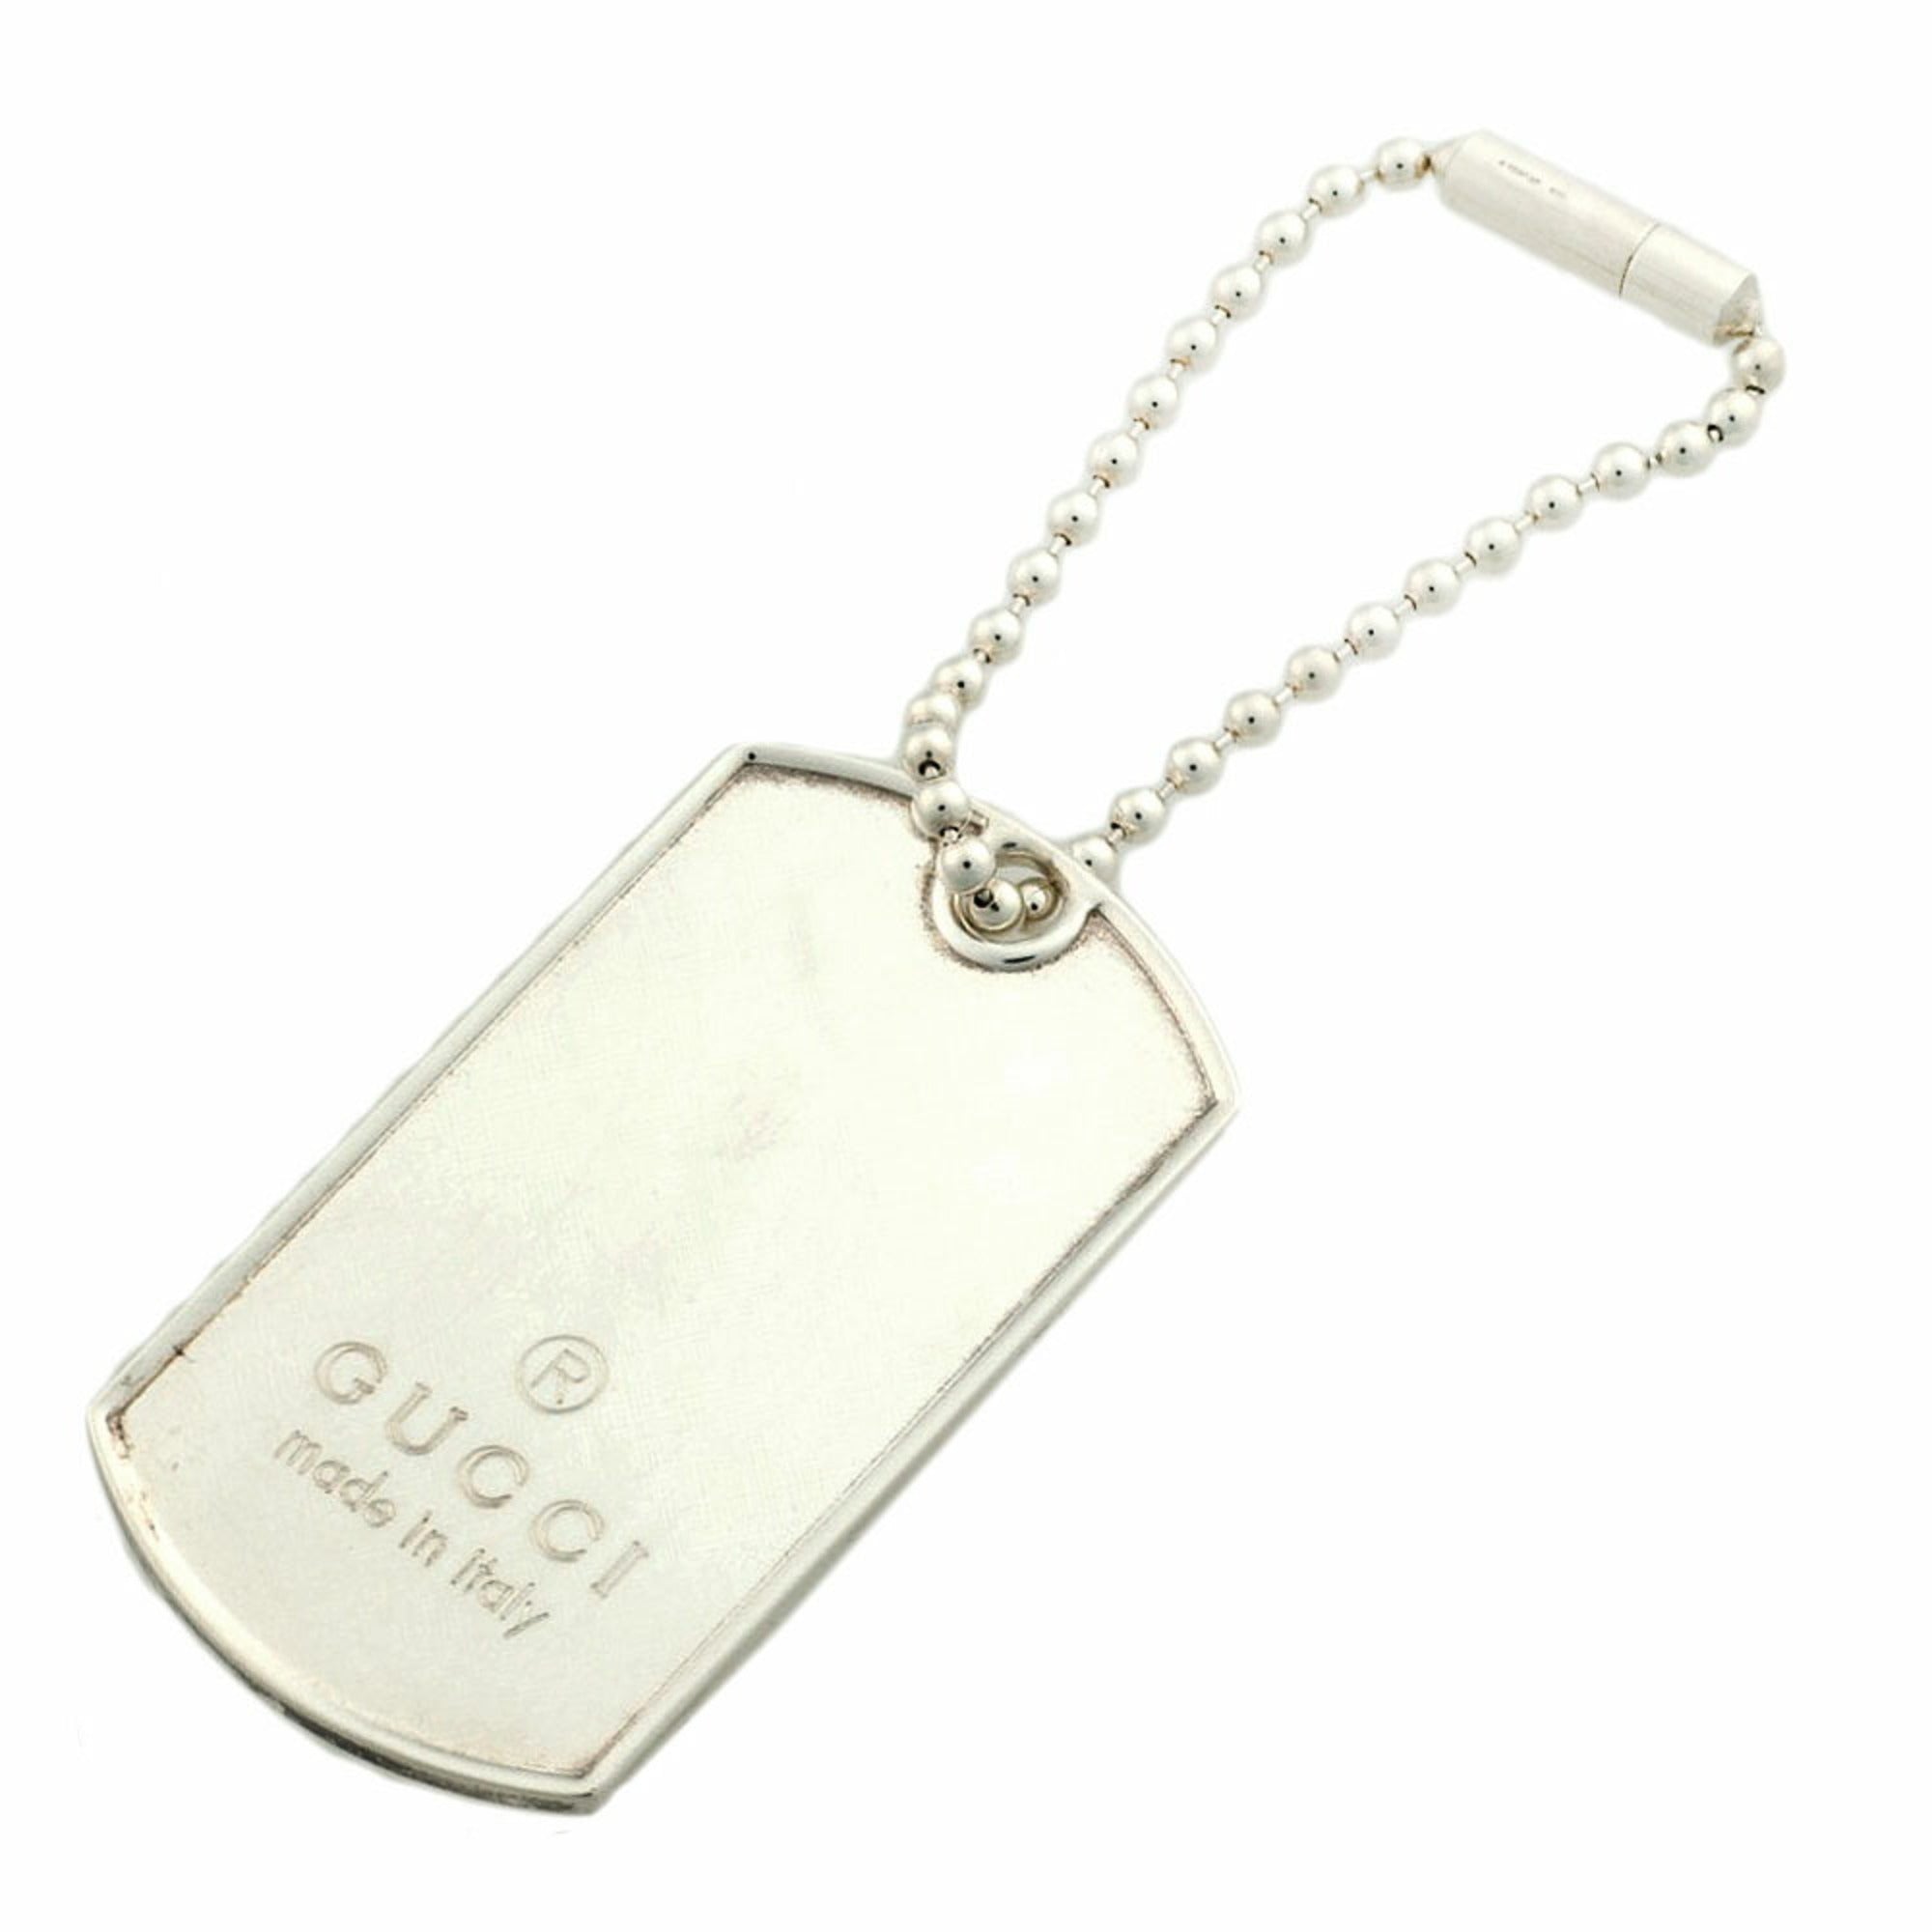 EXTRA LARGE GENUINE SILVER 925 GUCCI DOG TAG (2